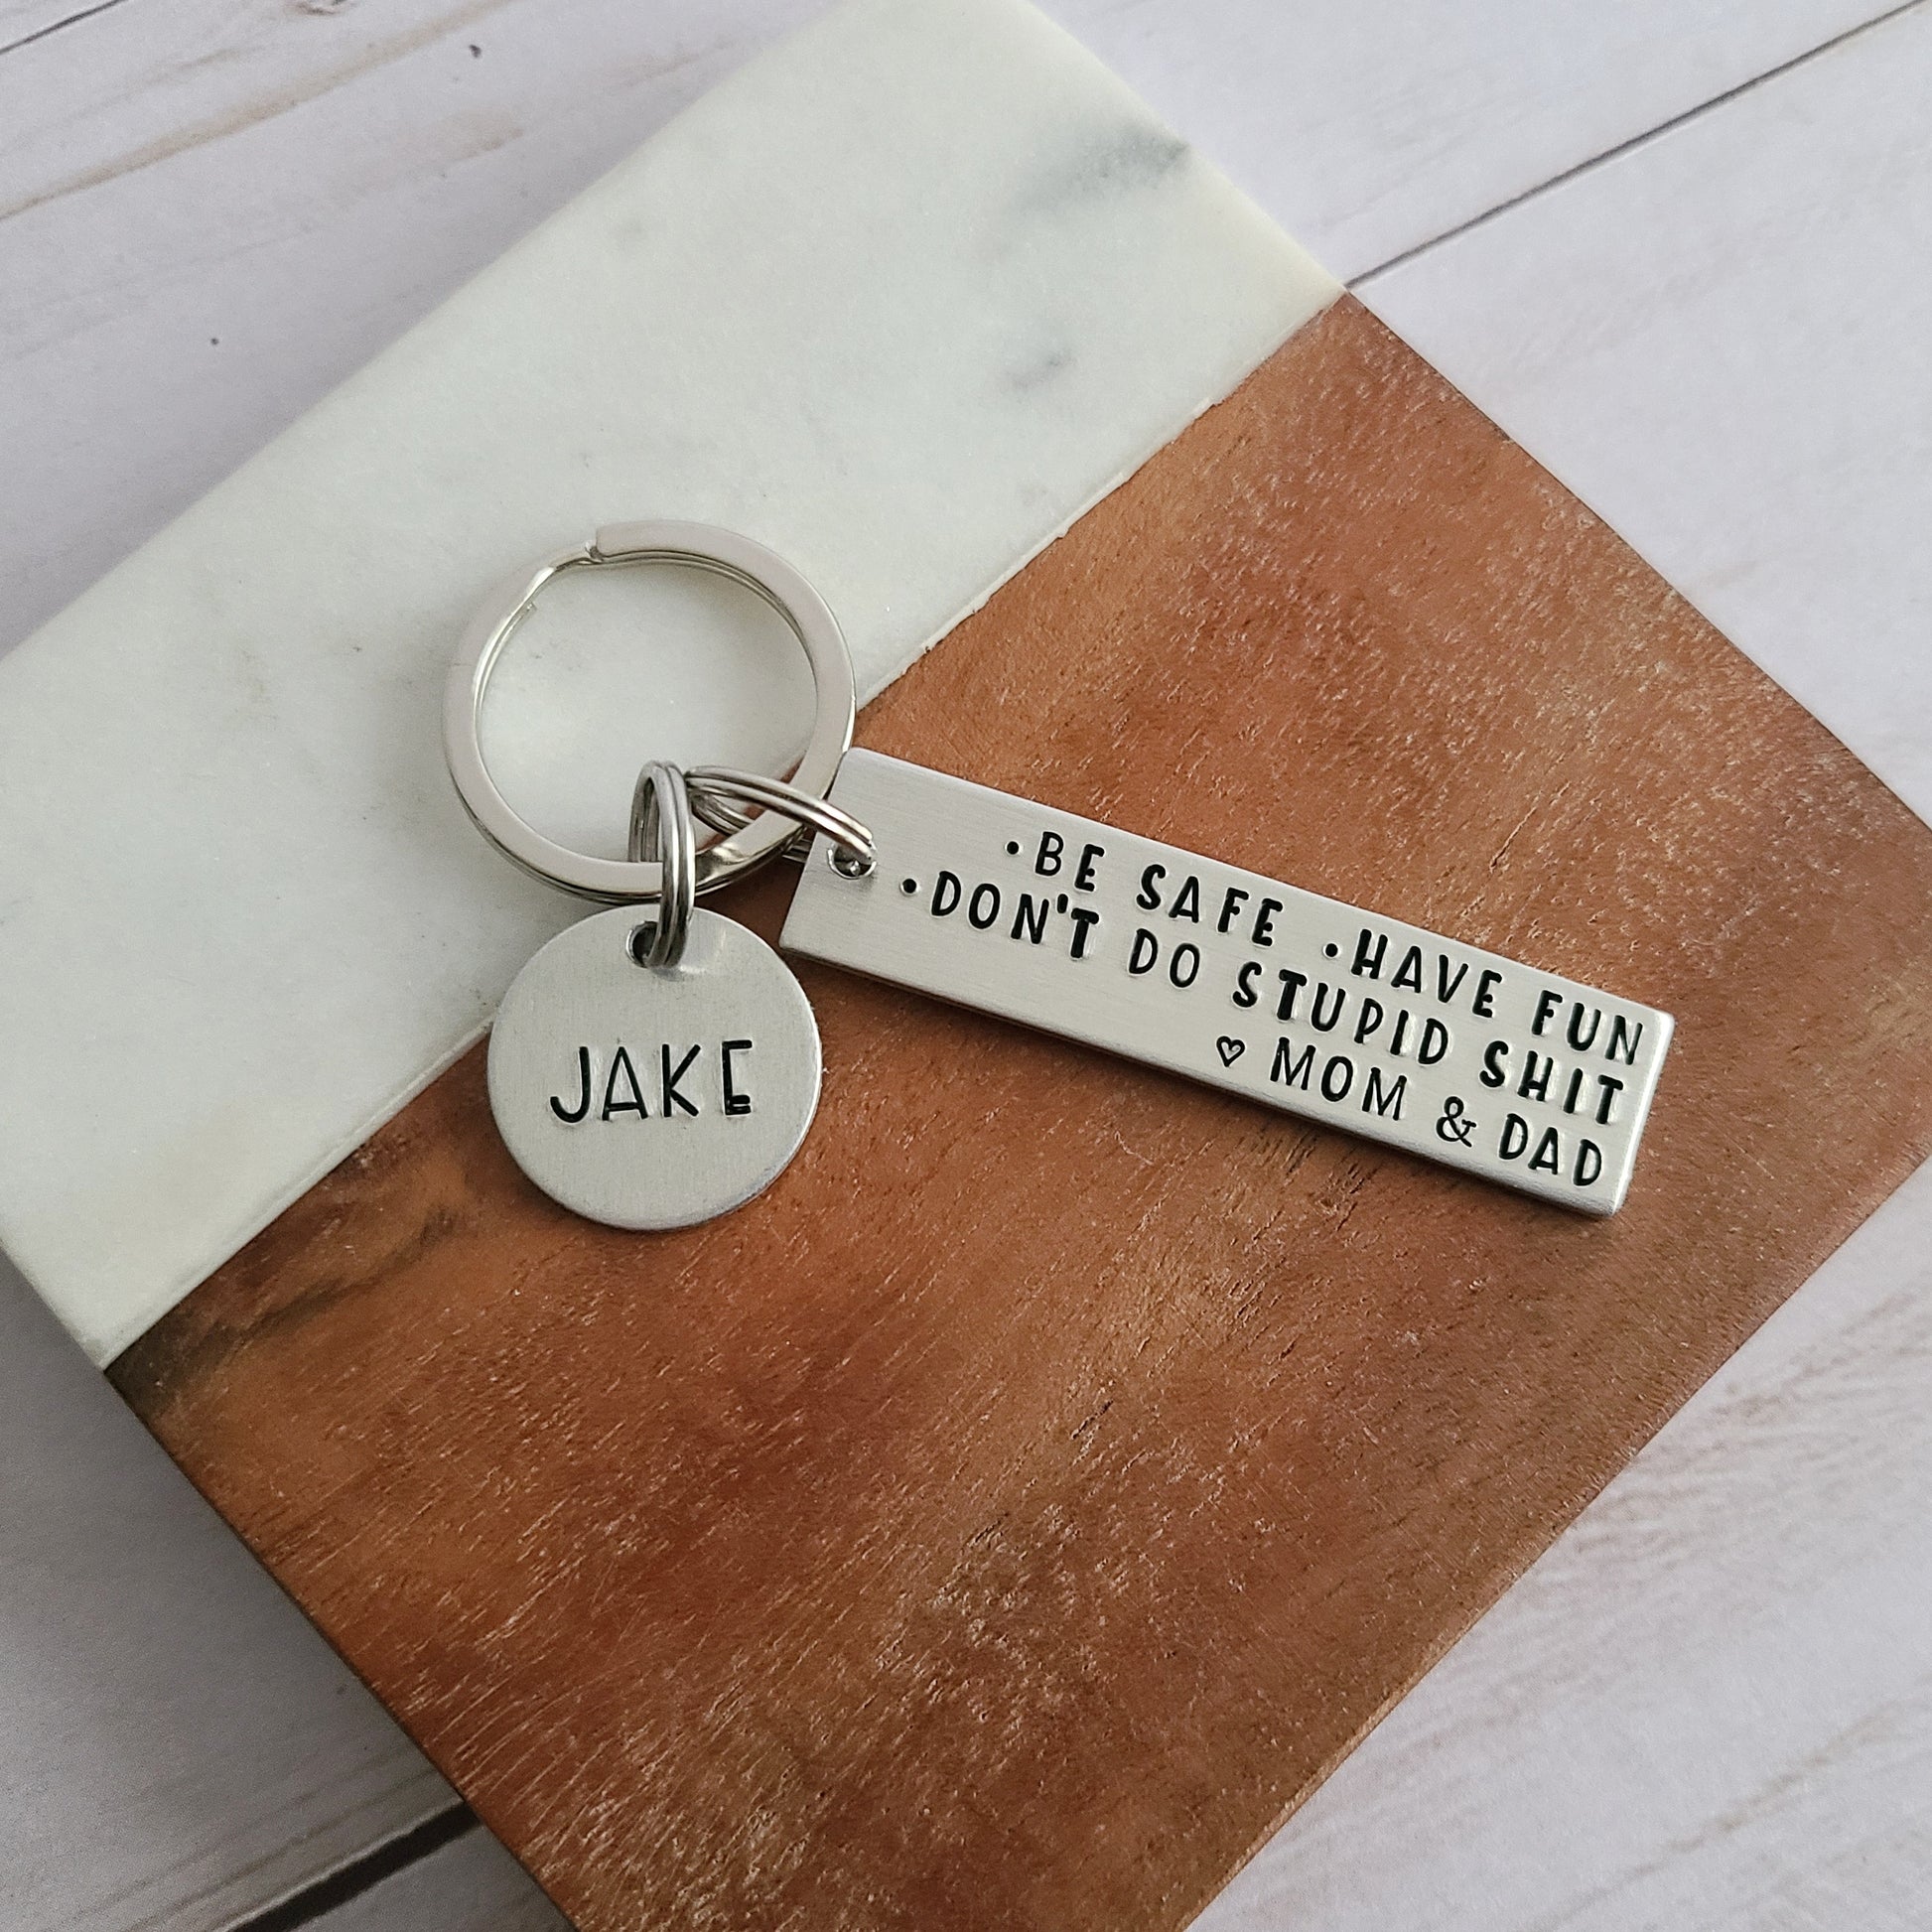 Be Safe Have Fun Don't Do Stupid Shit Love Mom & Dad Keychain, 1st Car  Keychain for Teenagers, Cute Car Accessories for Teens, Sweet 16 Birthday  Gifts